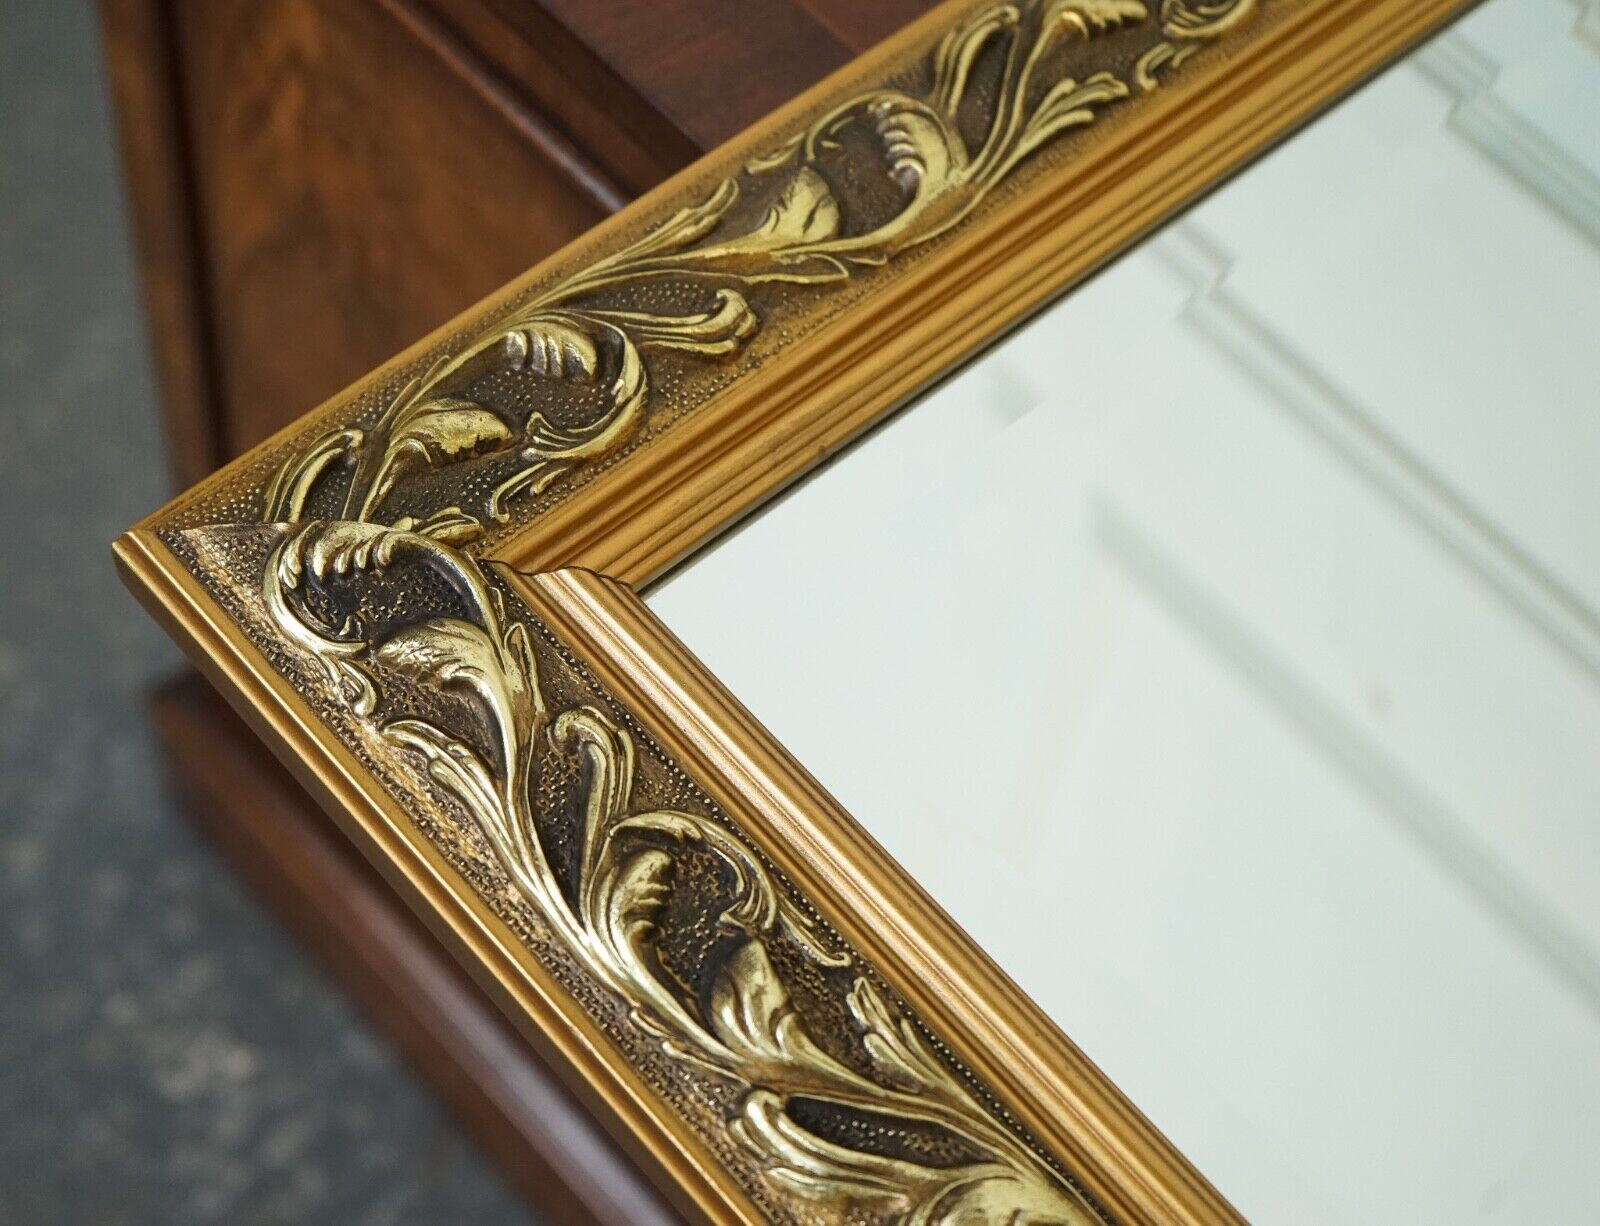 BEAUTIFUL VINTAGE CUSHIONED GILTWOOD BEVELLED MIRROR